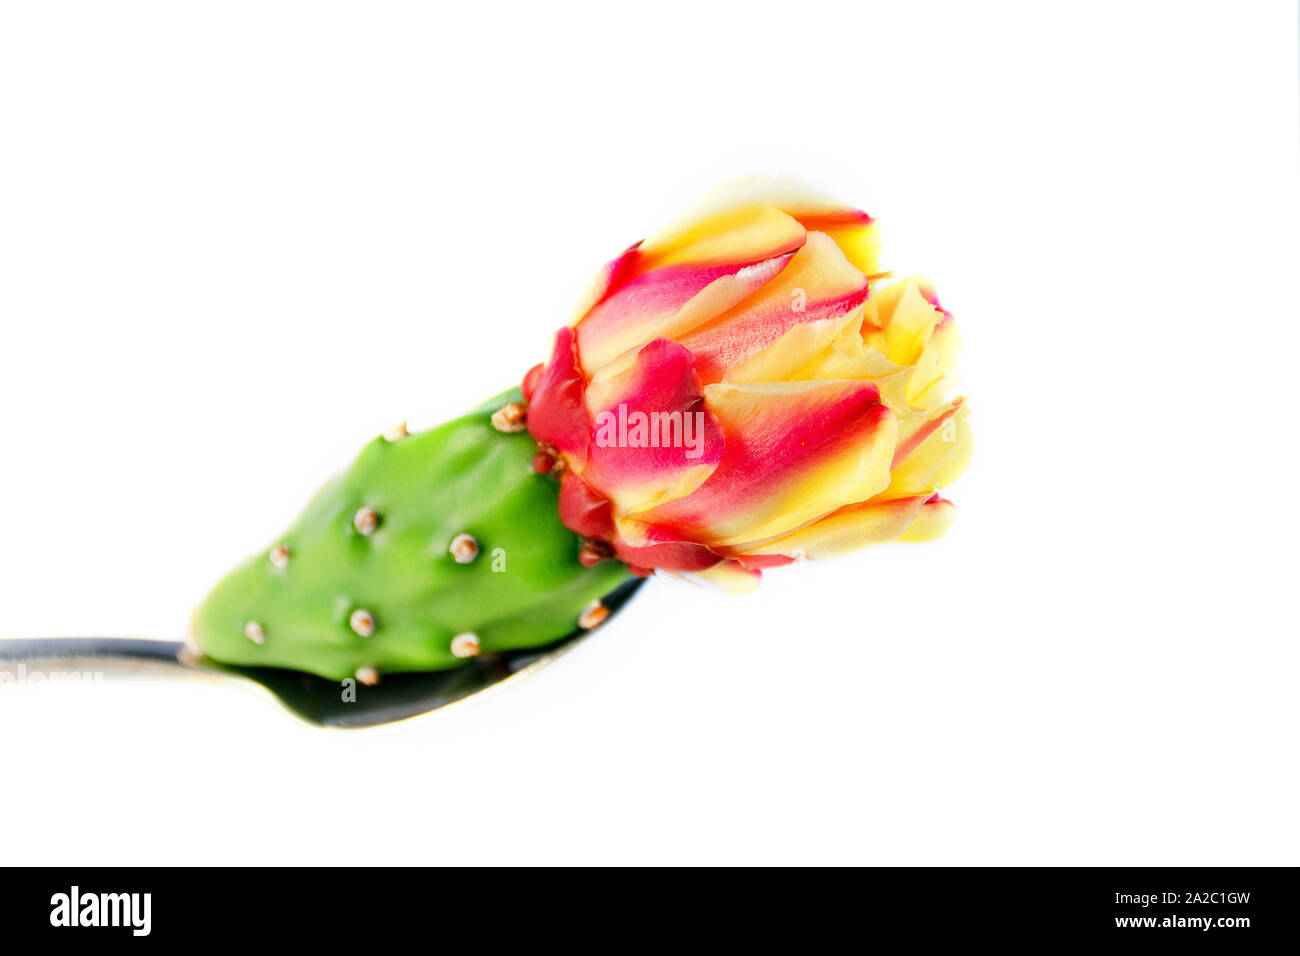 Prickly flower in spoon, side view, white background. Opuntia, barbary fig, ficus indica, Indian fig, spineless cactus, cactus pear. Stock Photo